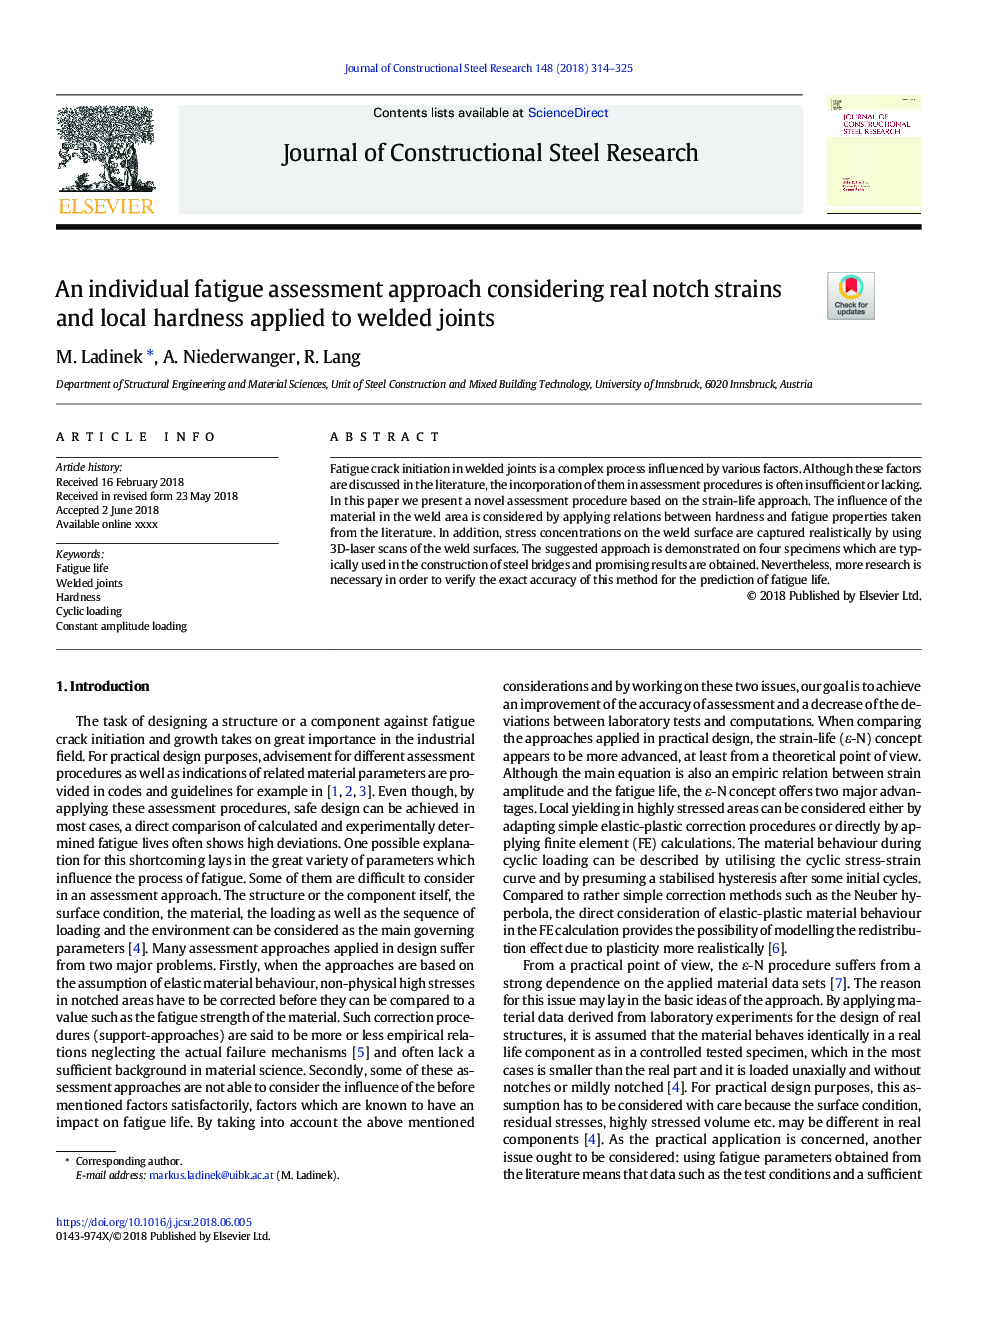 An individual fatigue assessment approach considering real notch strains and local hardness applied to welded joints